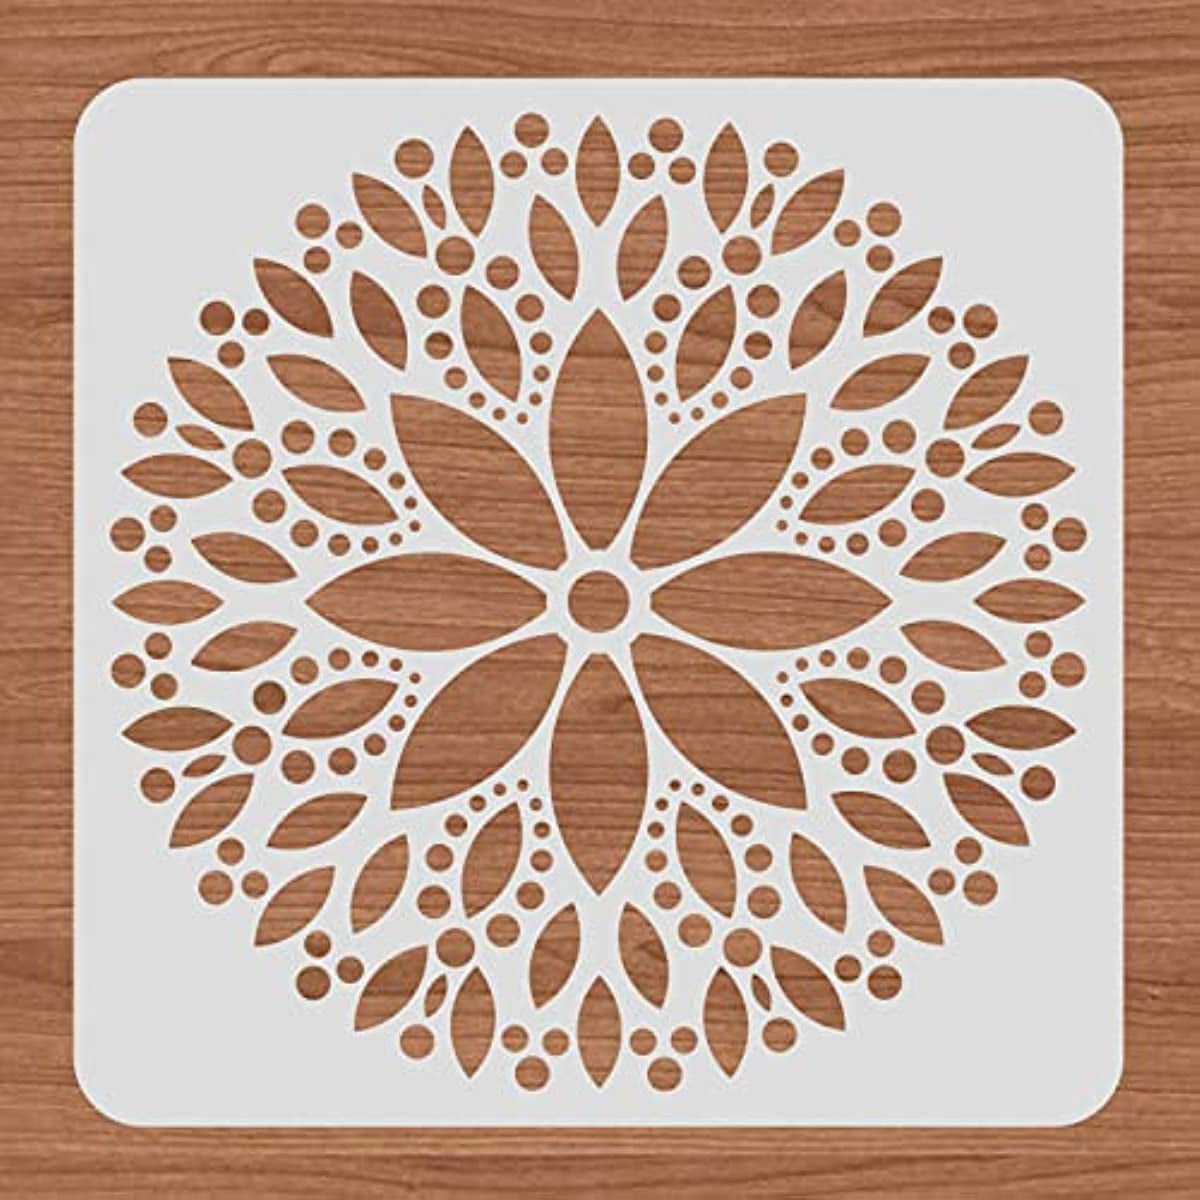 4 Pack 12x12 Inch Mandala Stencils, Large Reusable Stencils for Crafts -  Laser Cut Painting Template - Drawing Stencil for Floor, Wall, Tile,  Fabric